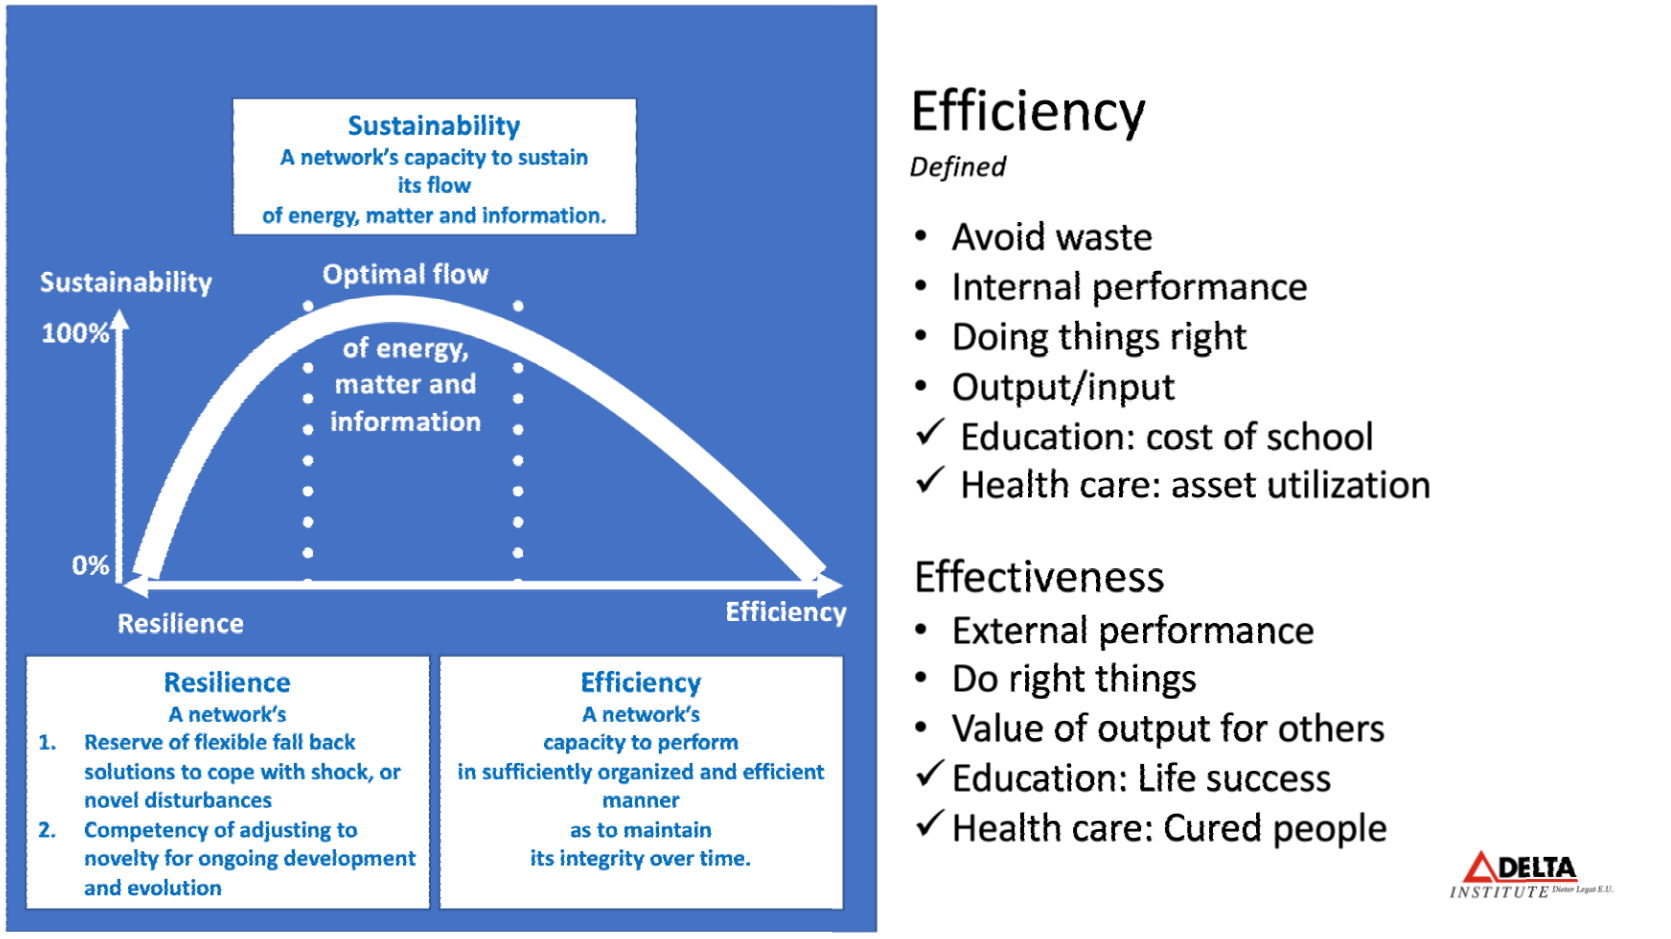 The Law of Sustainability by Lietaer - What is efficiency?